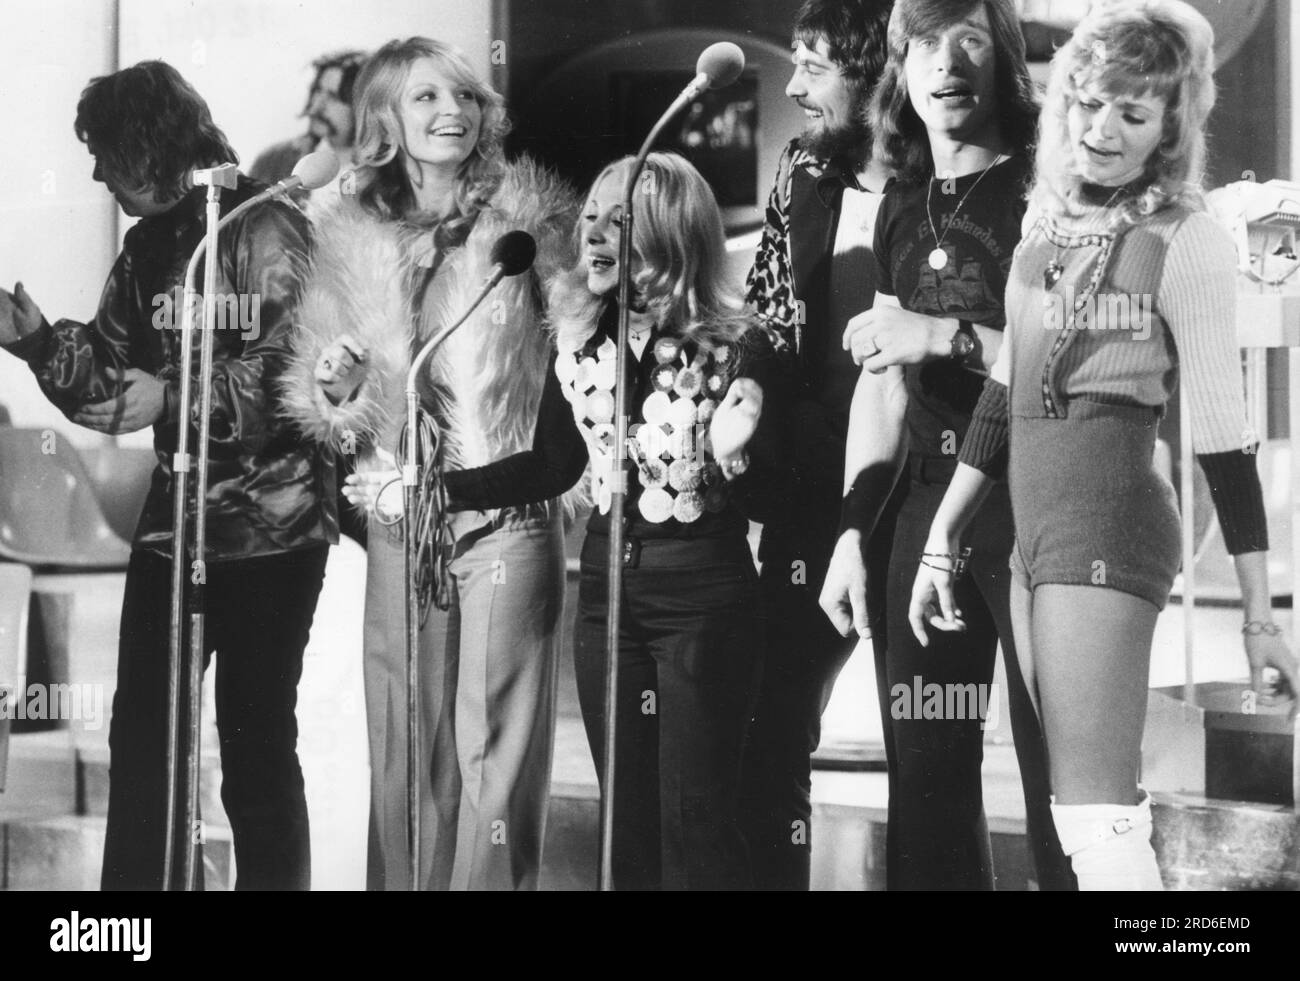 WIR, German pop band, manager: Drafi Deutscher, presentation, Hamburg, 9.10.1972, ADDITIONAL-RIGHTS-CLEARANCE-INFO-NOT-AVAILABLE Stock Photo